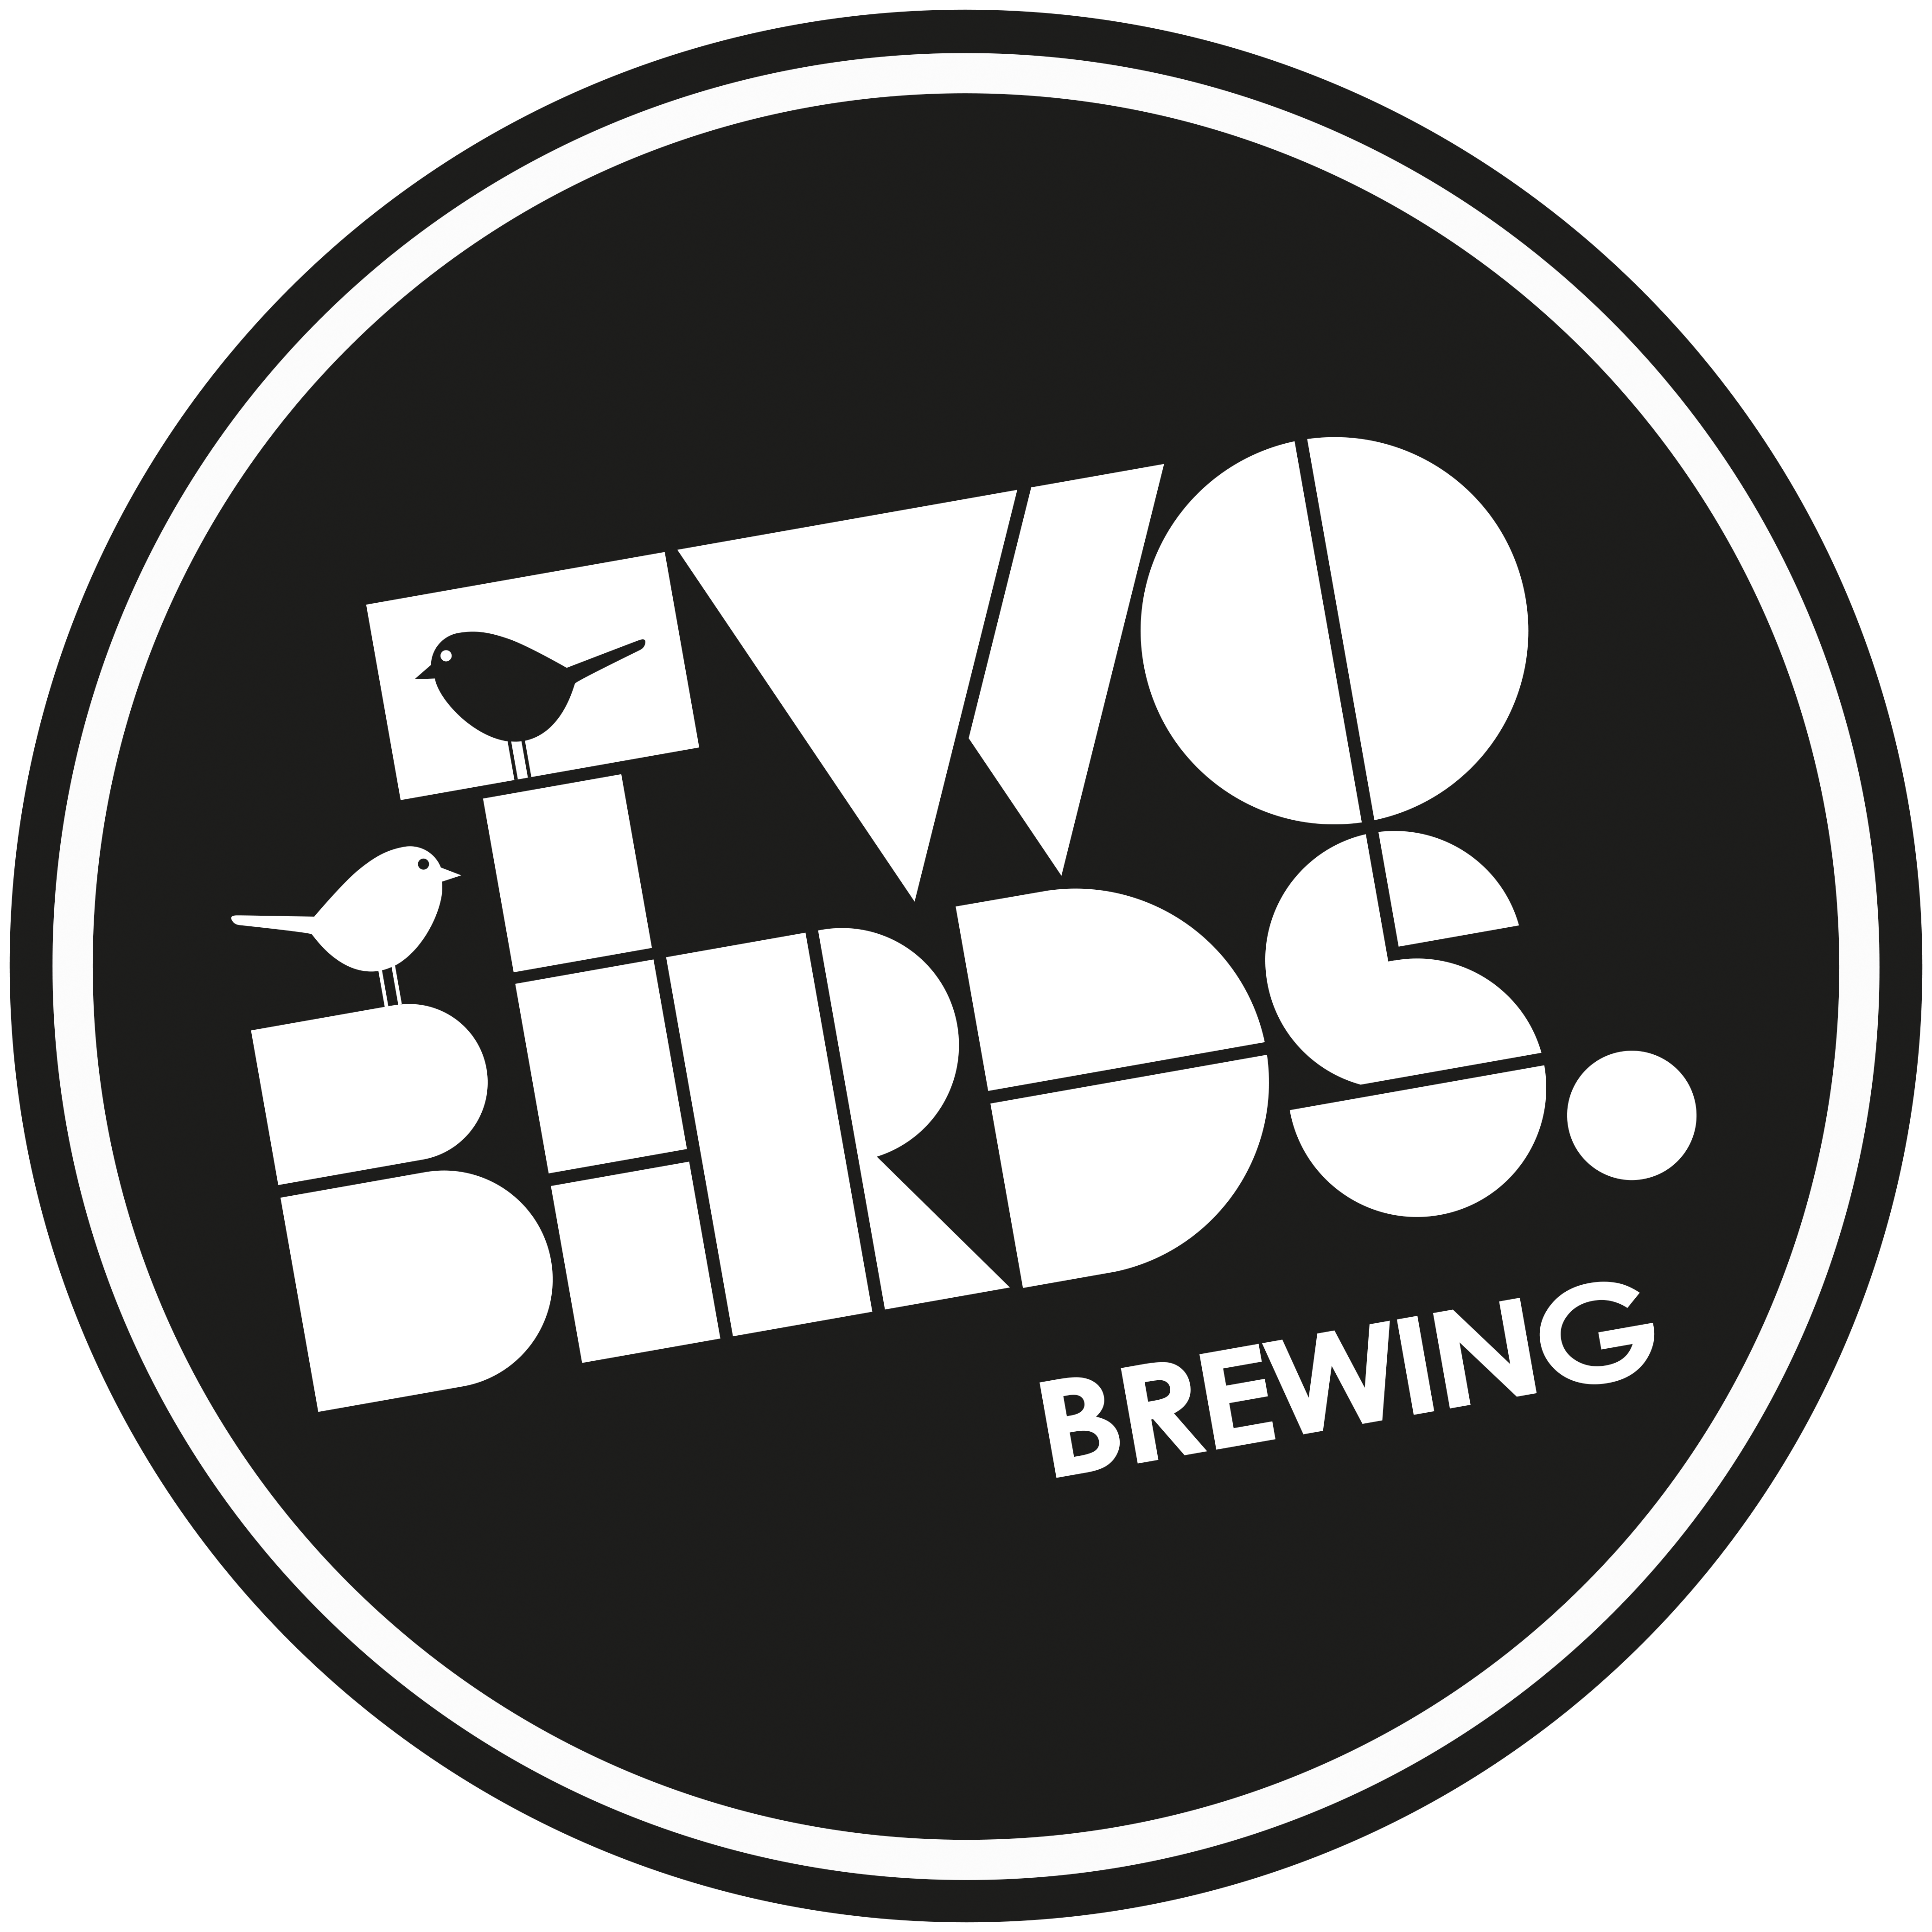 Two Birds in a Circle Logo - Two birds - Logo (Angled).jpg - Craft Beer & Cider Festival Sunshine ...